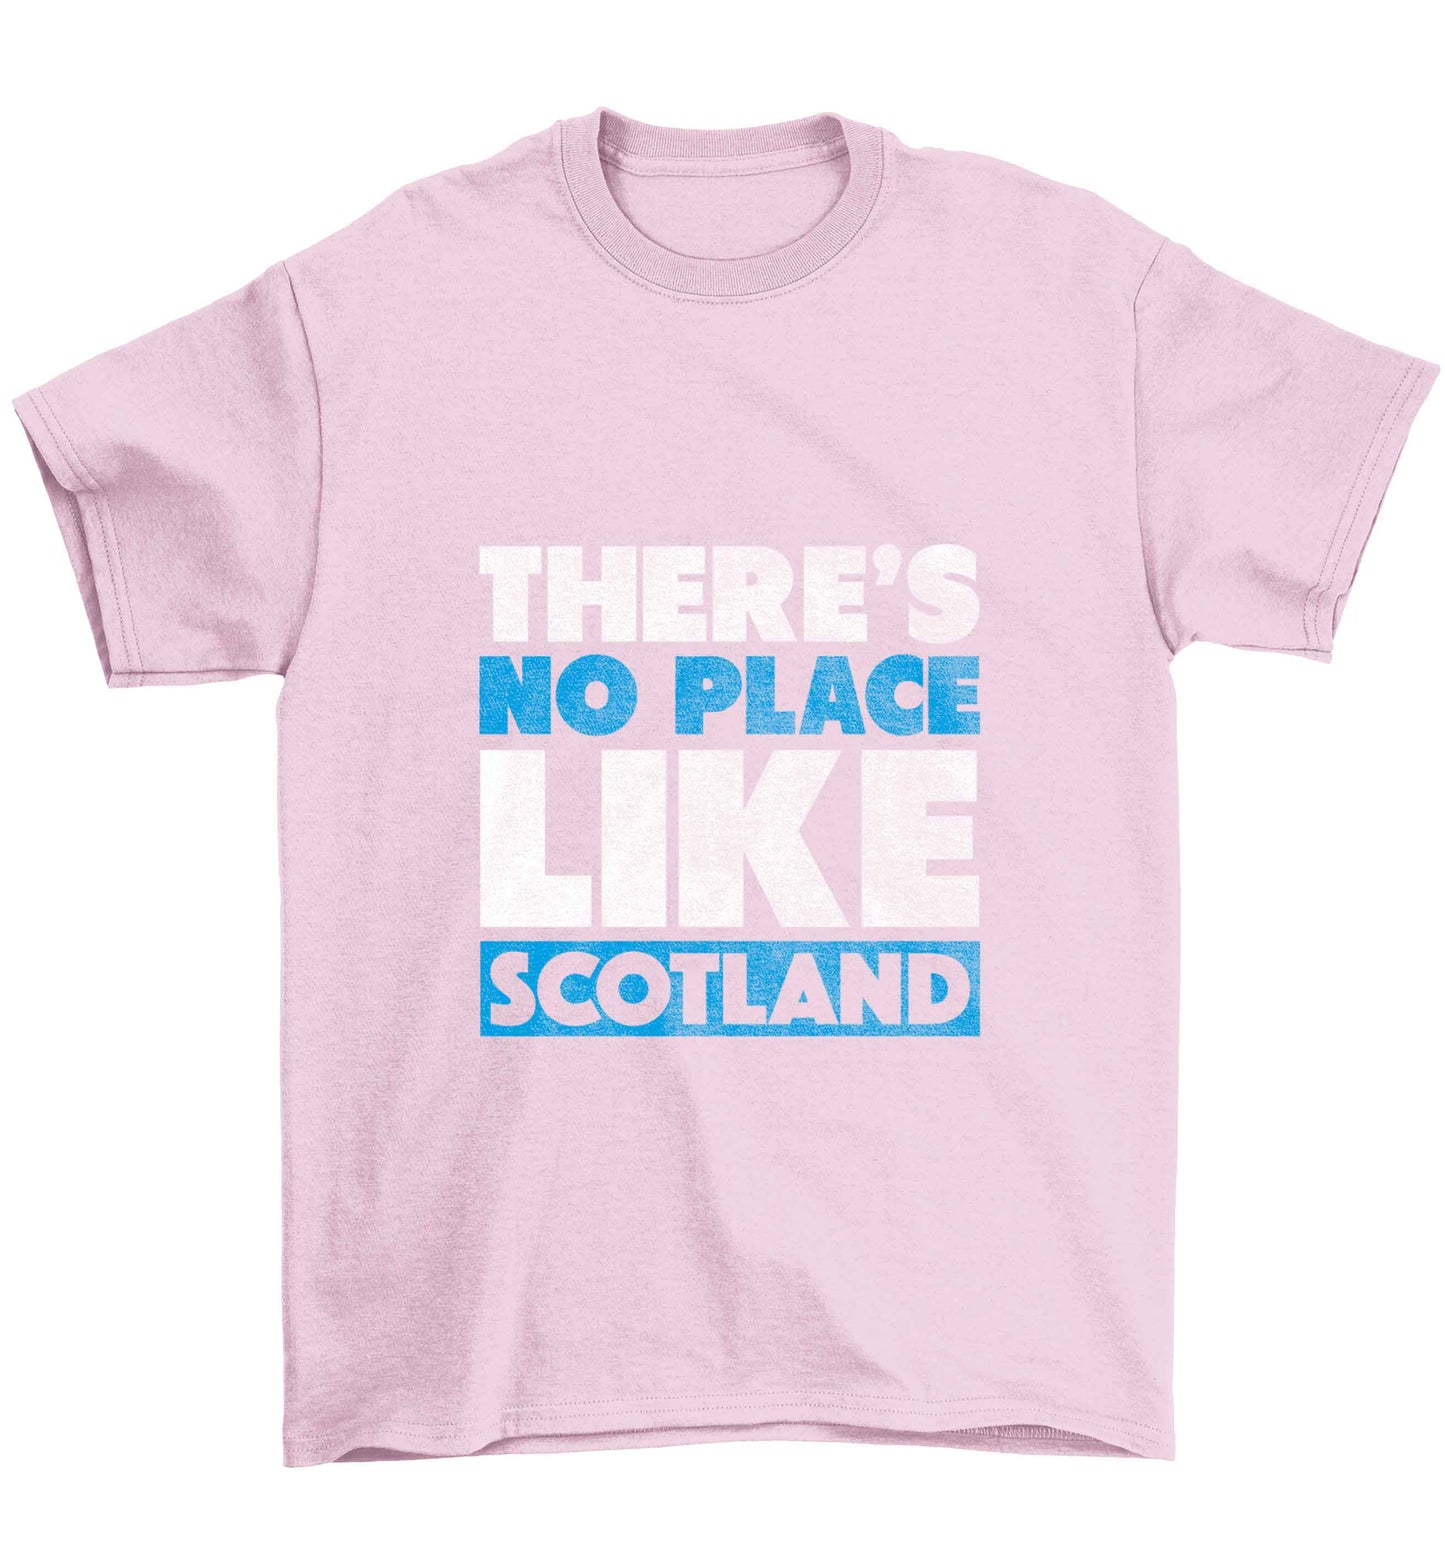 There's no place like Scotland Children's light pink Tshirt 12-13 Years